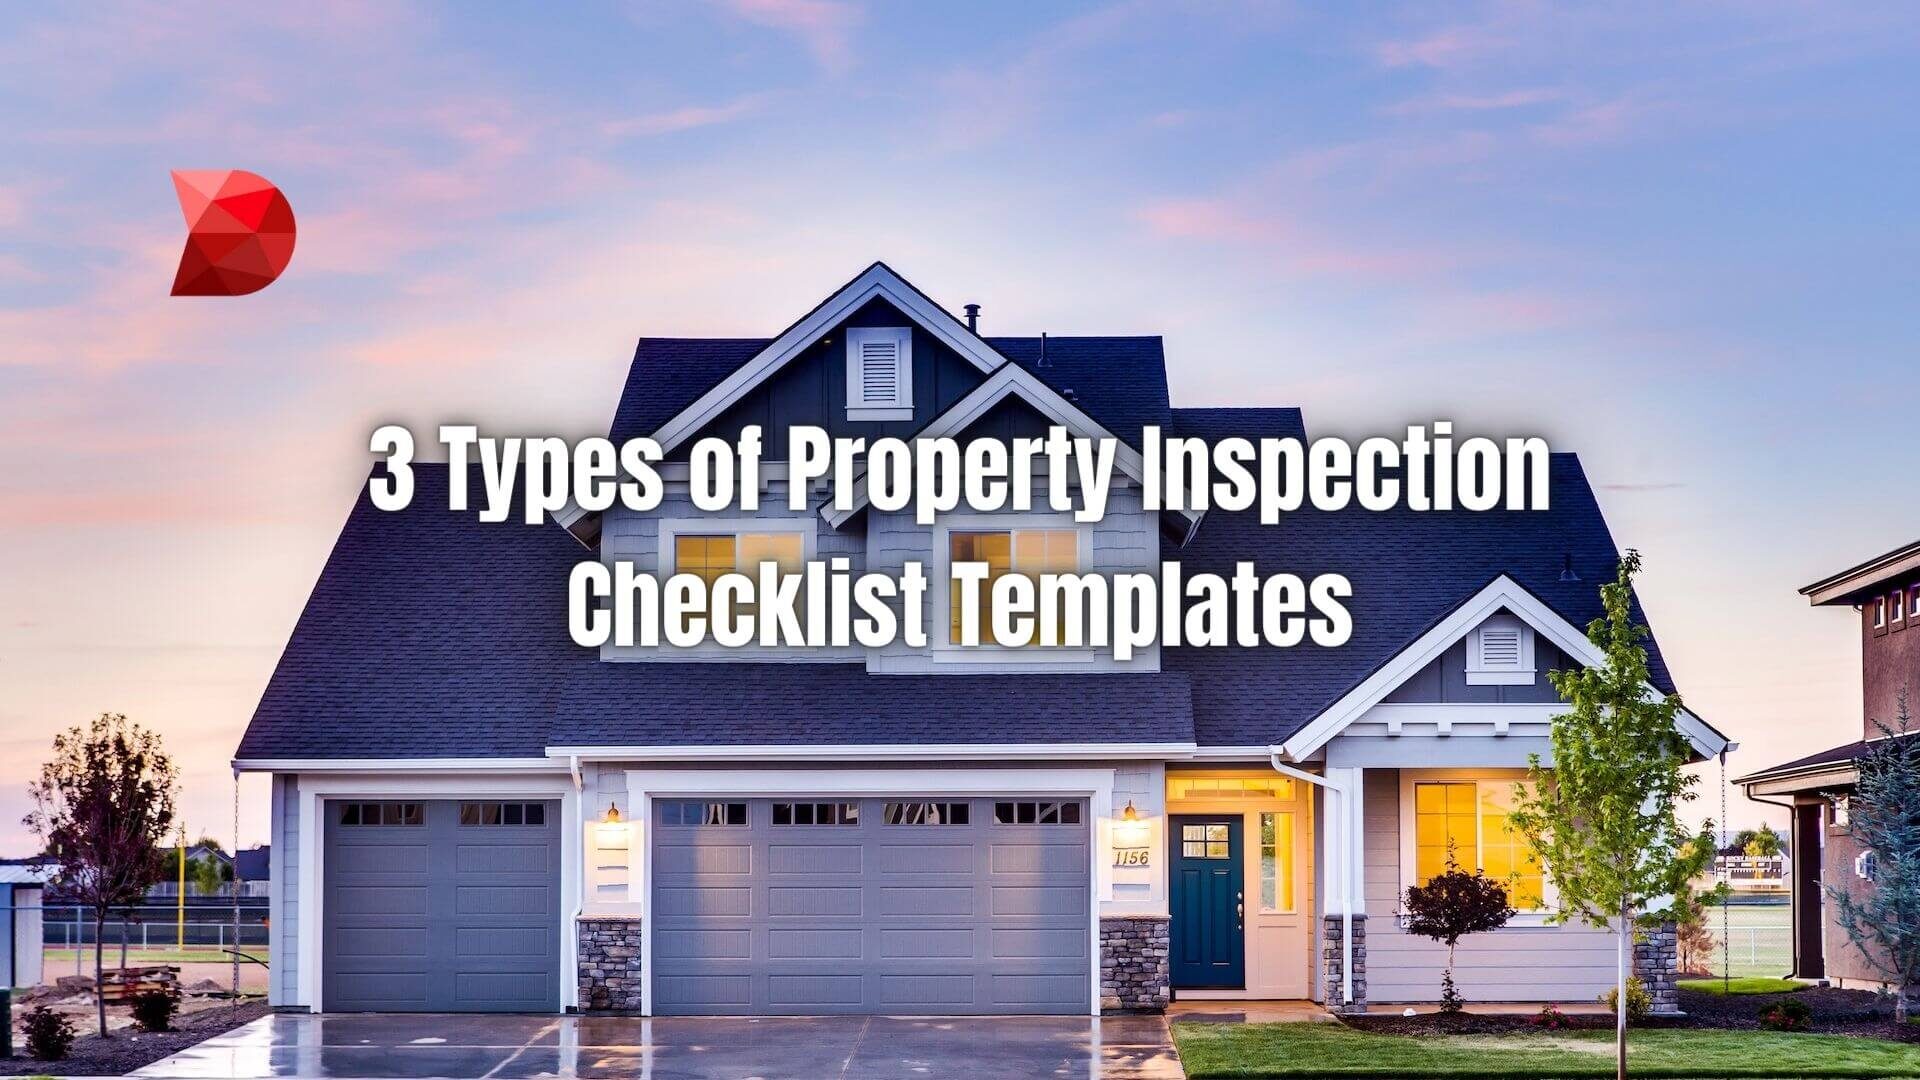 Discover the ultimate resource for property managers! Here are 3 property inspection checklist templates for seamless property management.